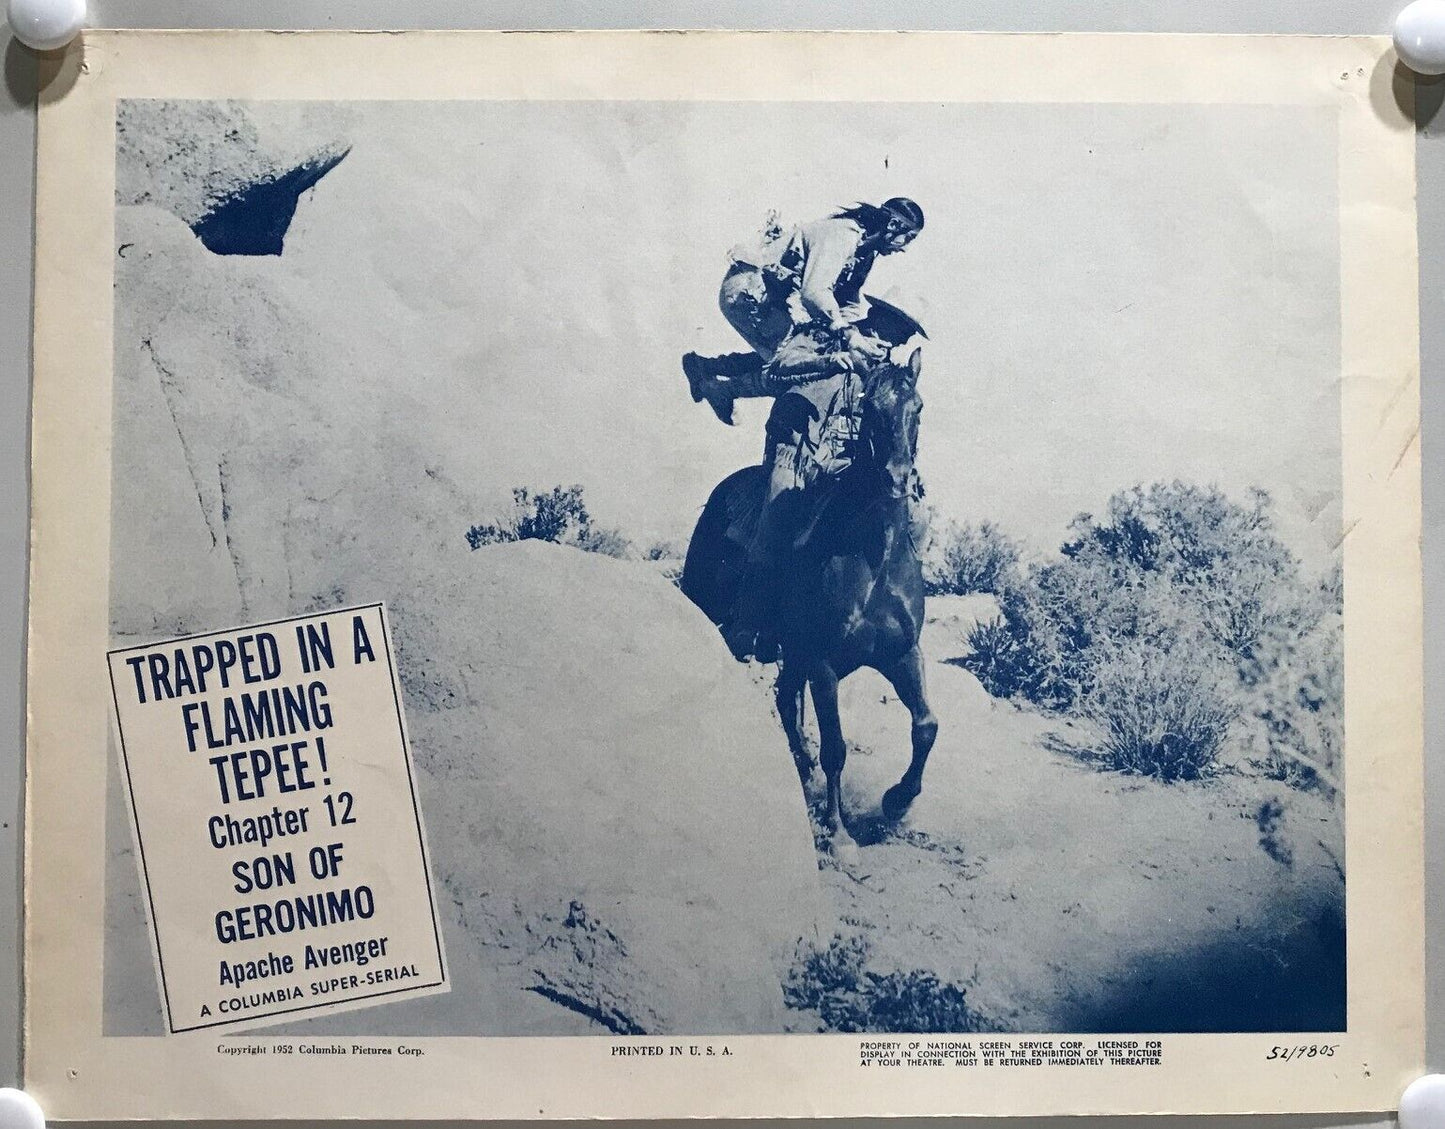 ORIGINAL SERIAL LOBBY CARD - SON OF GERONIMO (d) - 1952 - Ch 12 "Trapped in a...